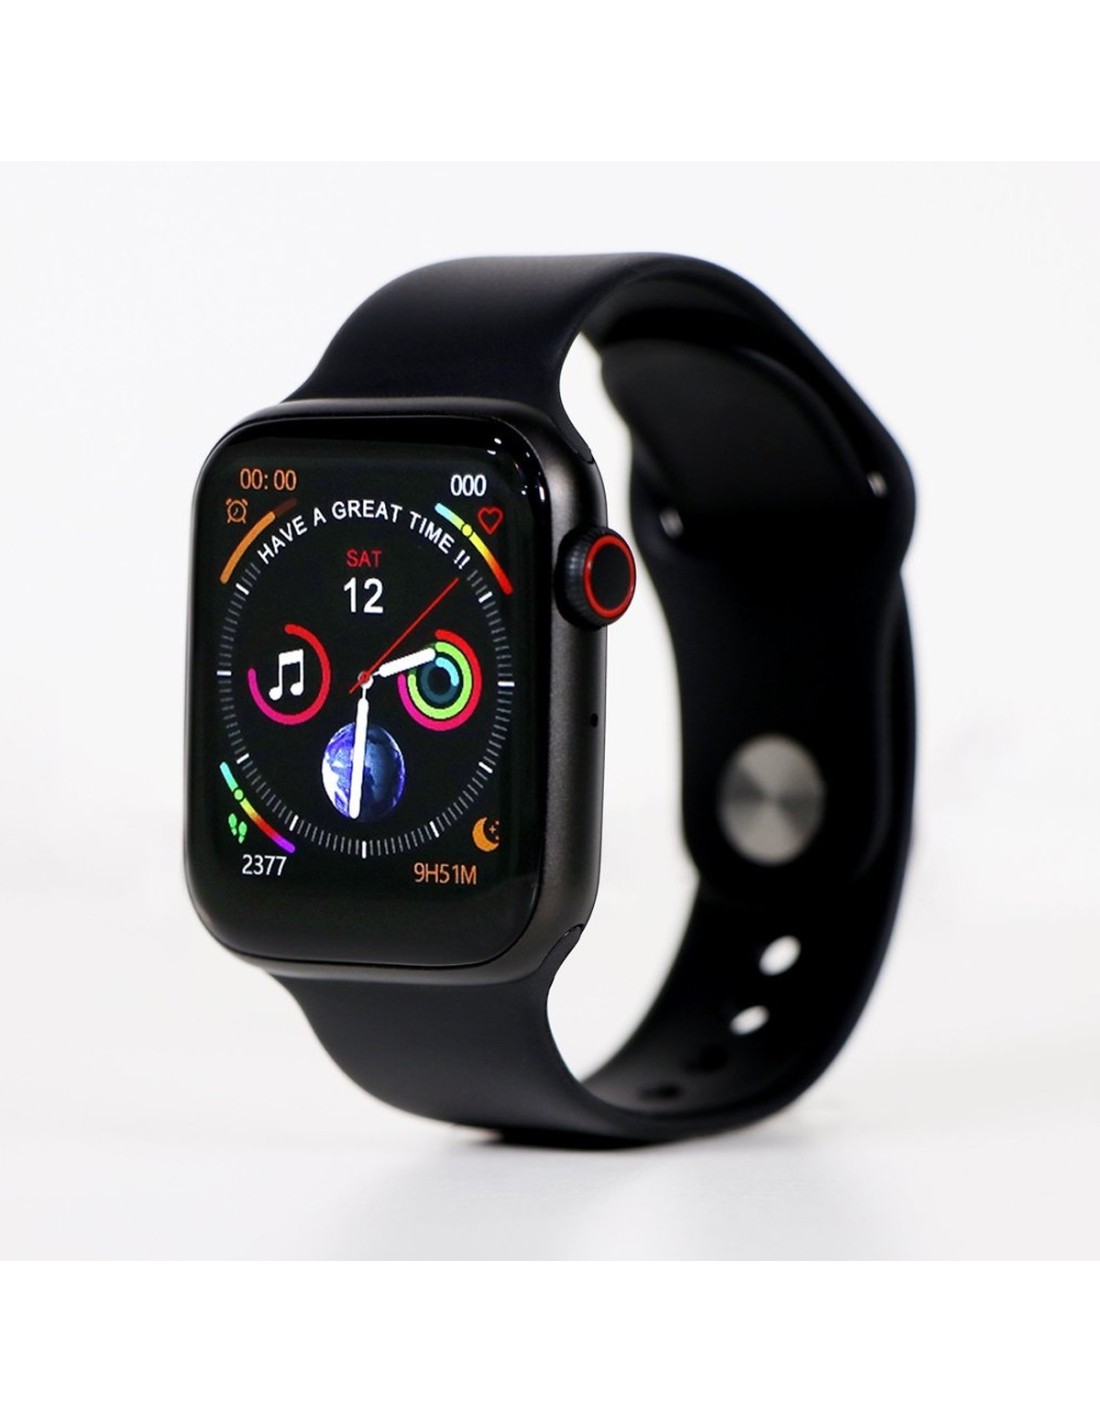 SMART Watch Hw 22 Android